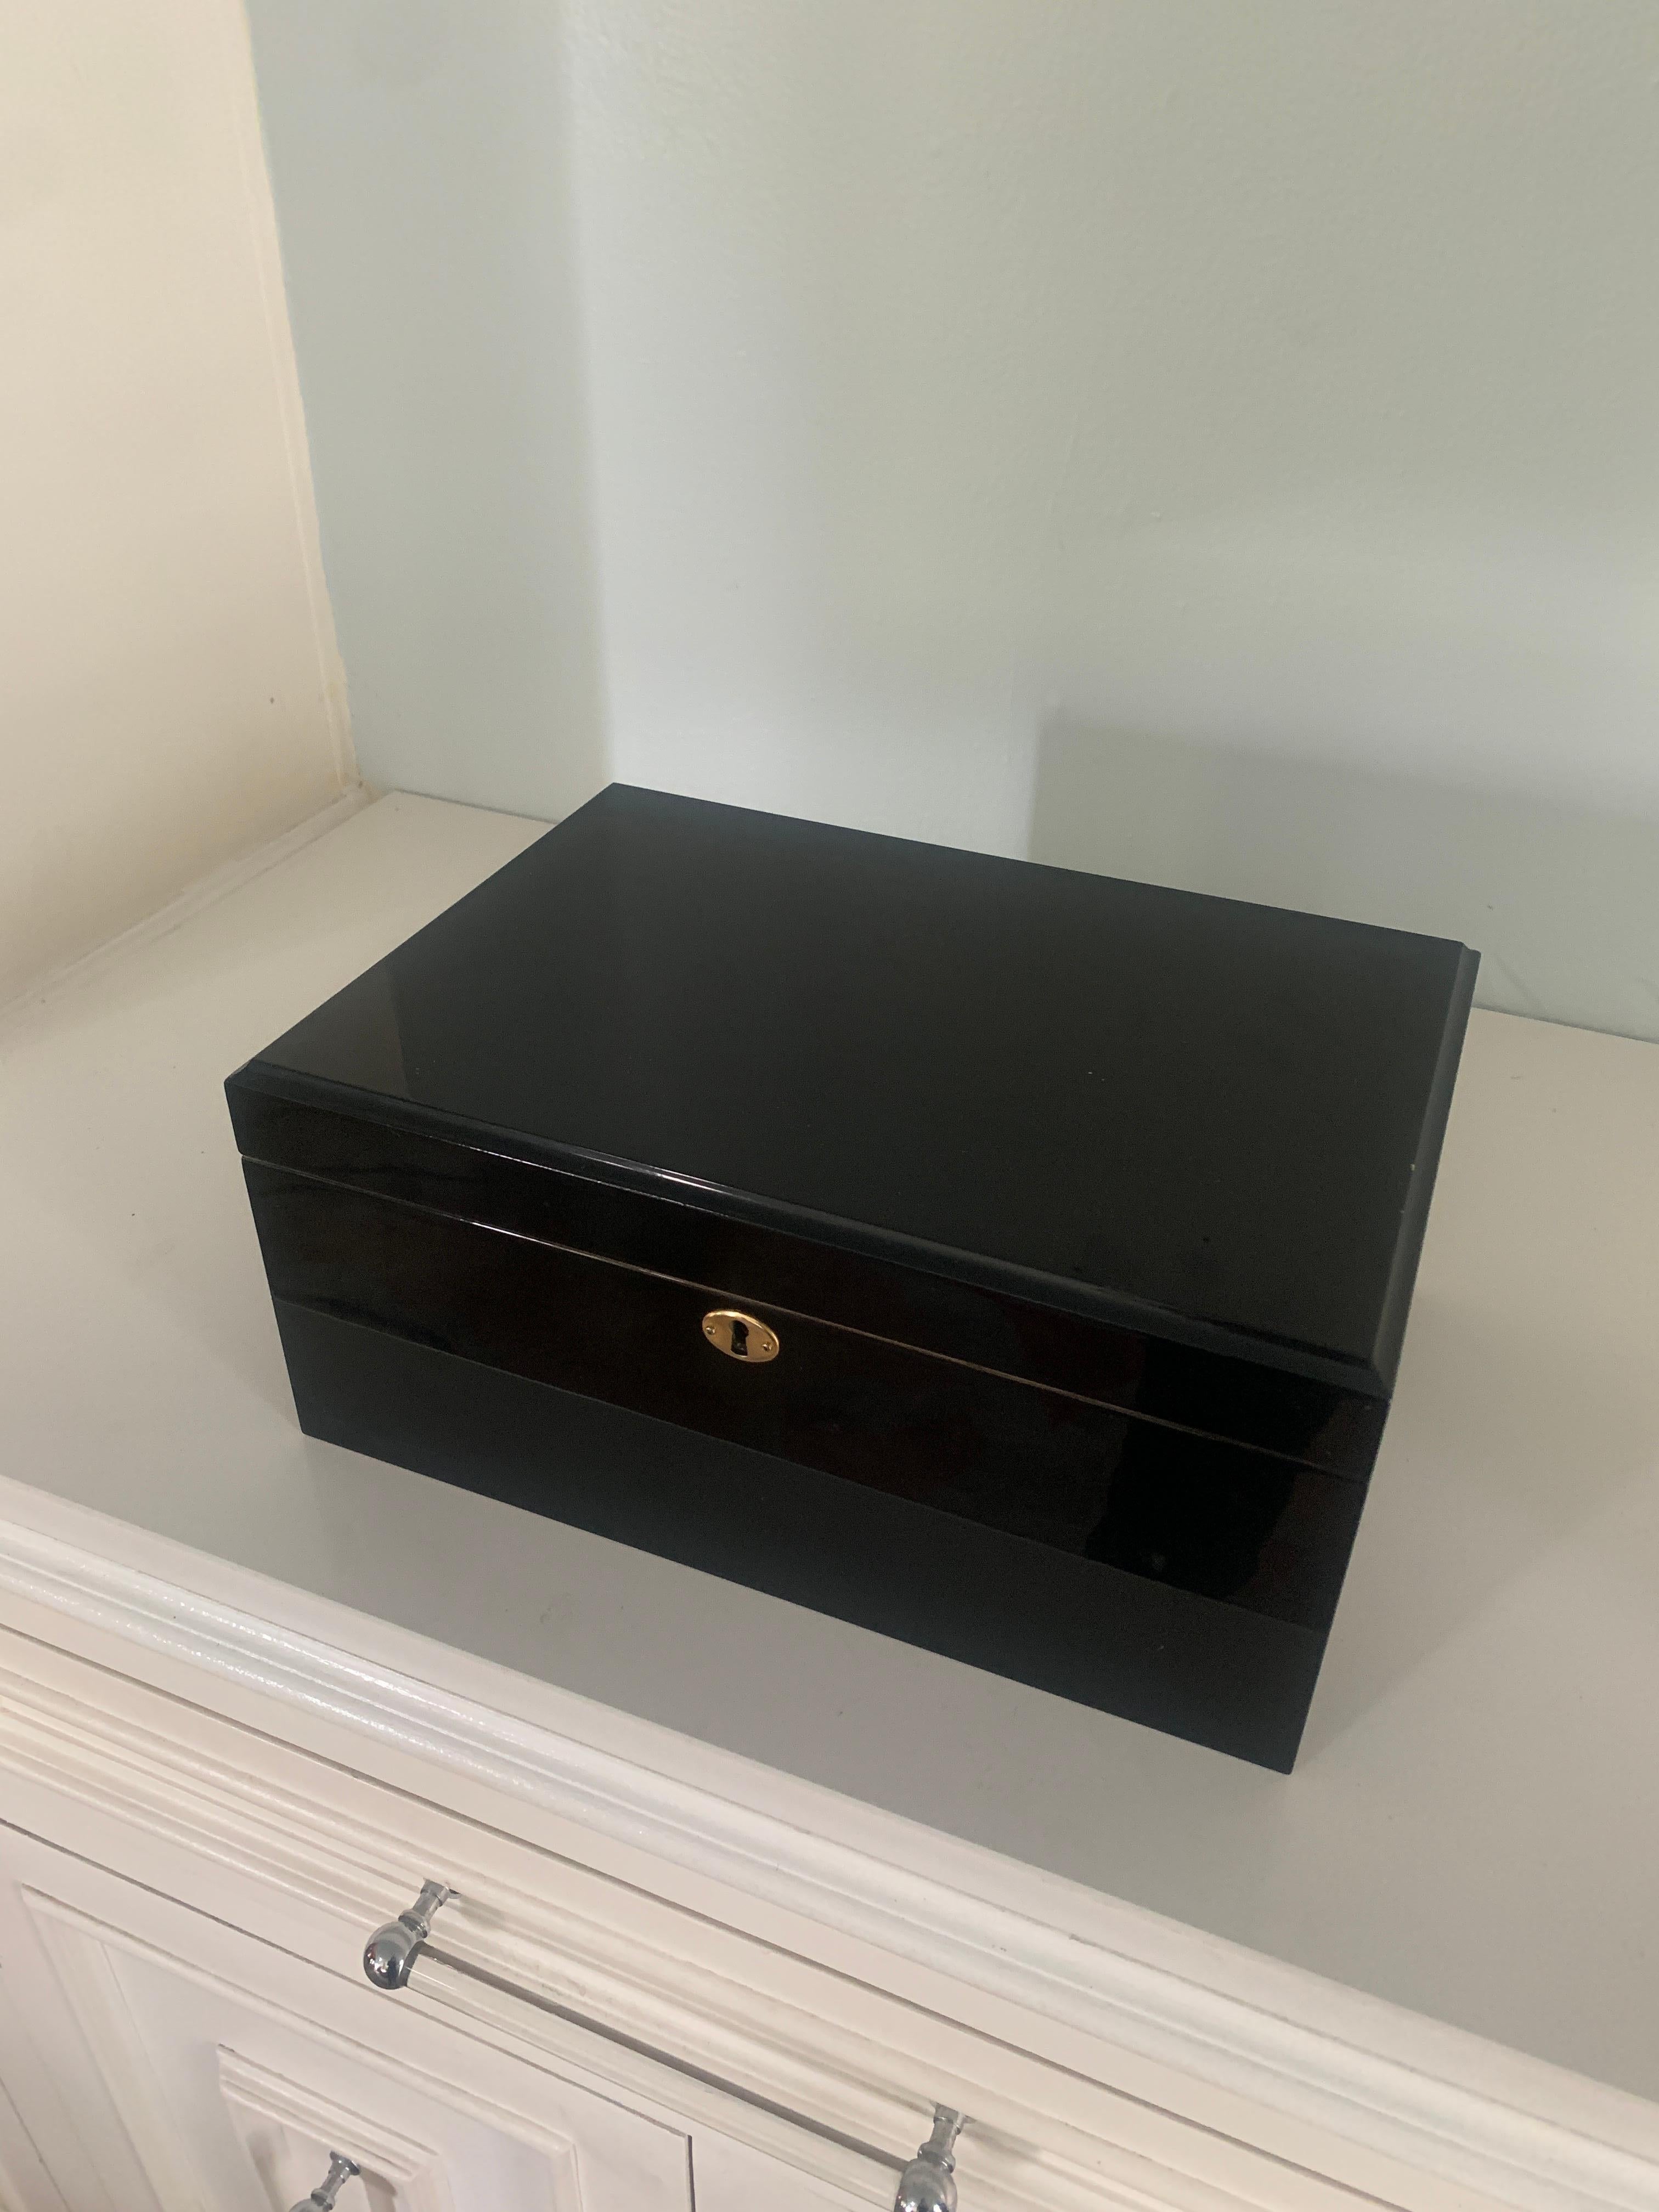 Large and highly polished black humidor with brass key detail. The Cedar lined interior reveals a shelf and will hold many cigars of varying size. Each level has removable sections to separate your Cuban from your fine home rolled!

The hinged top